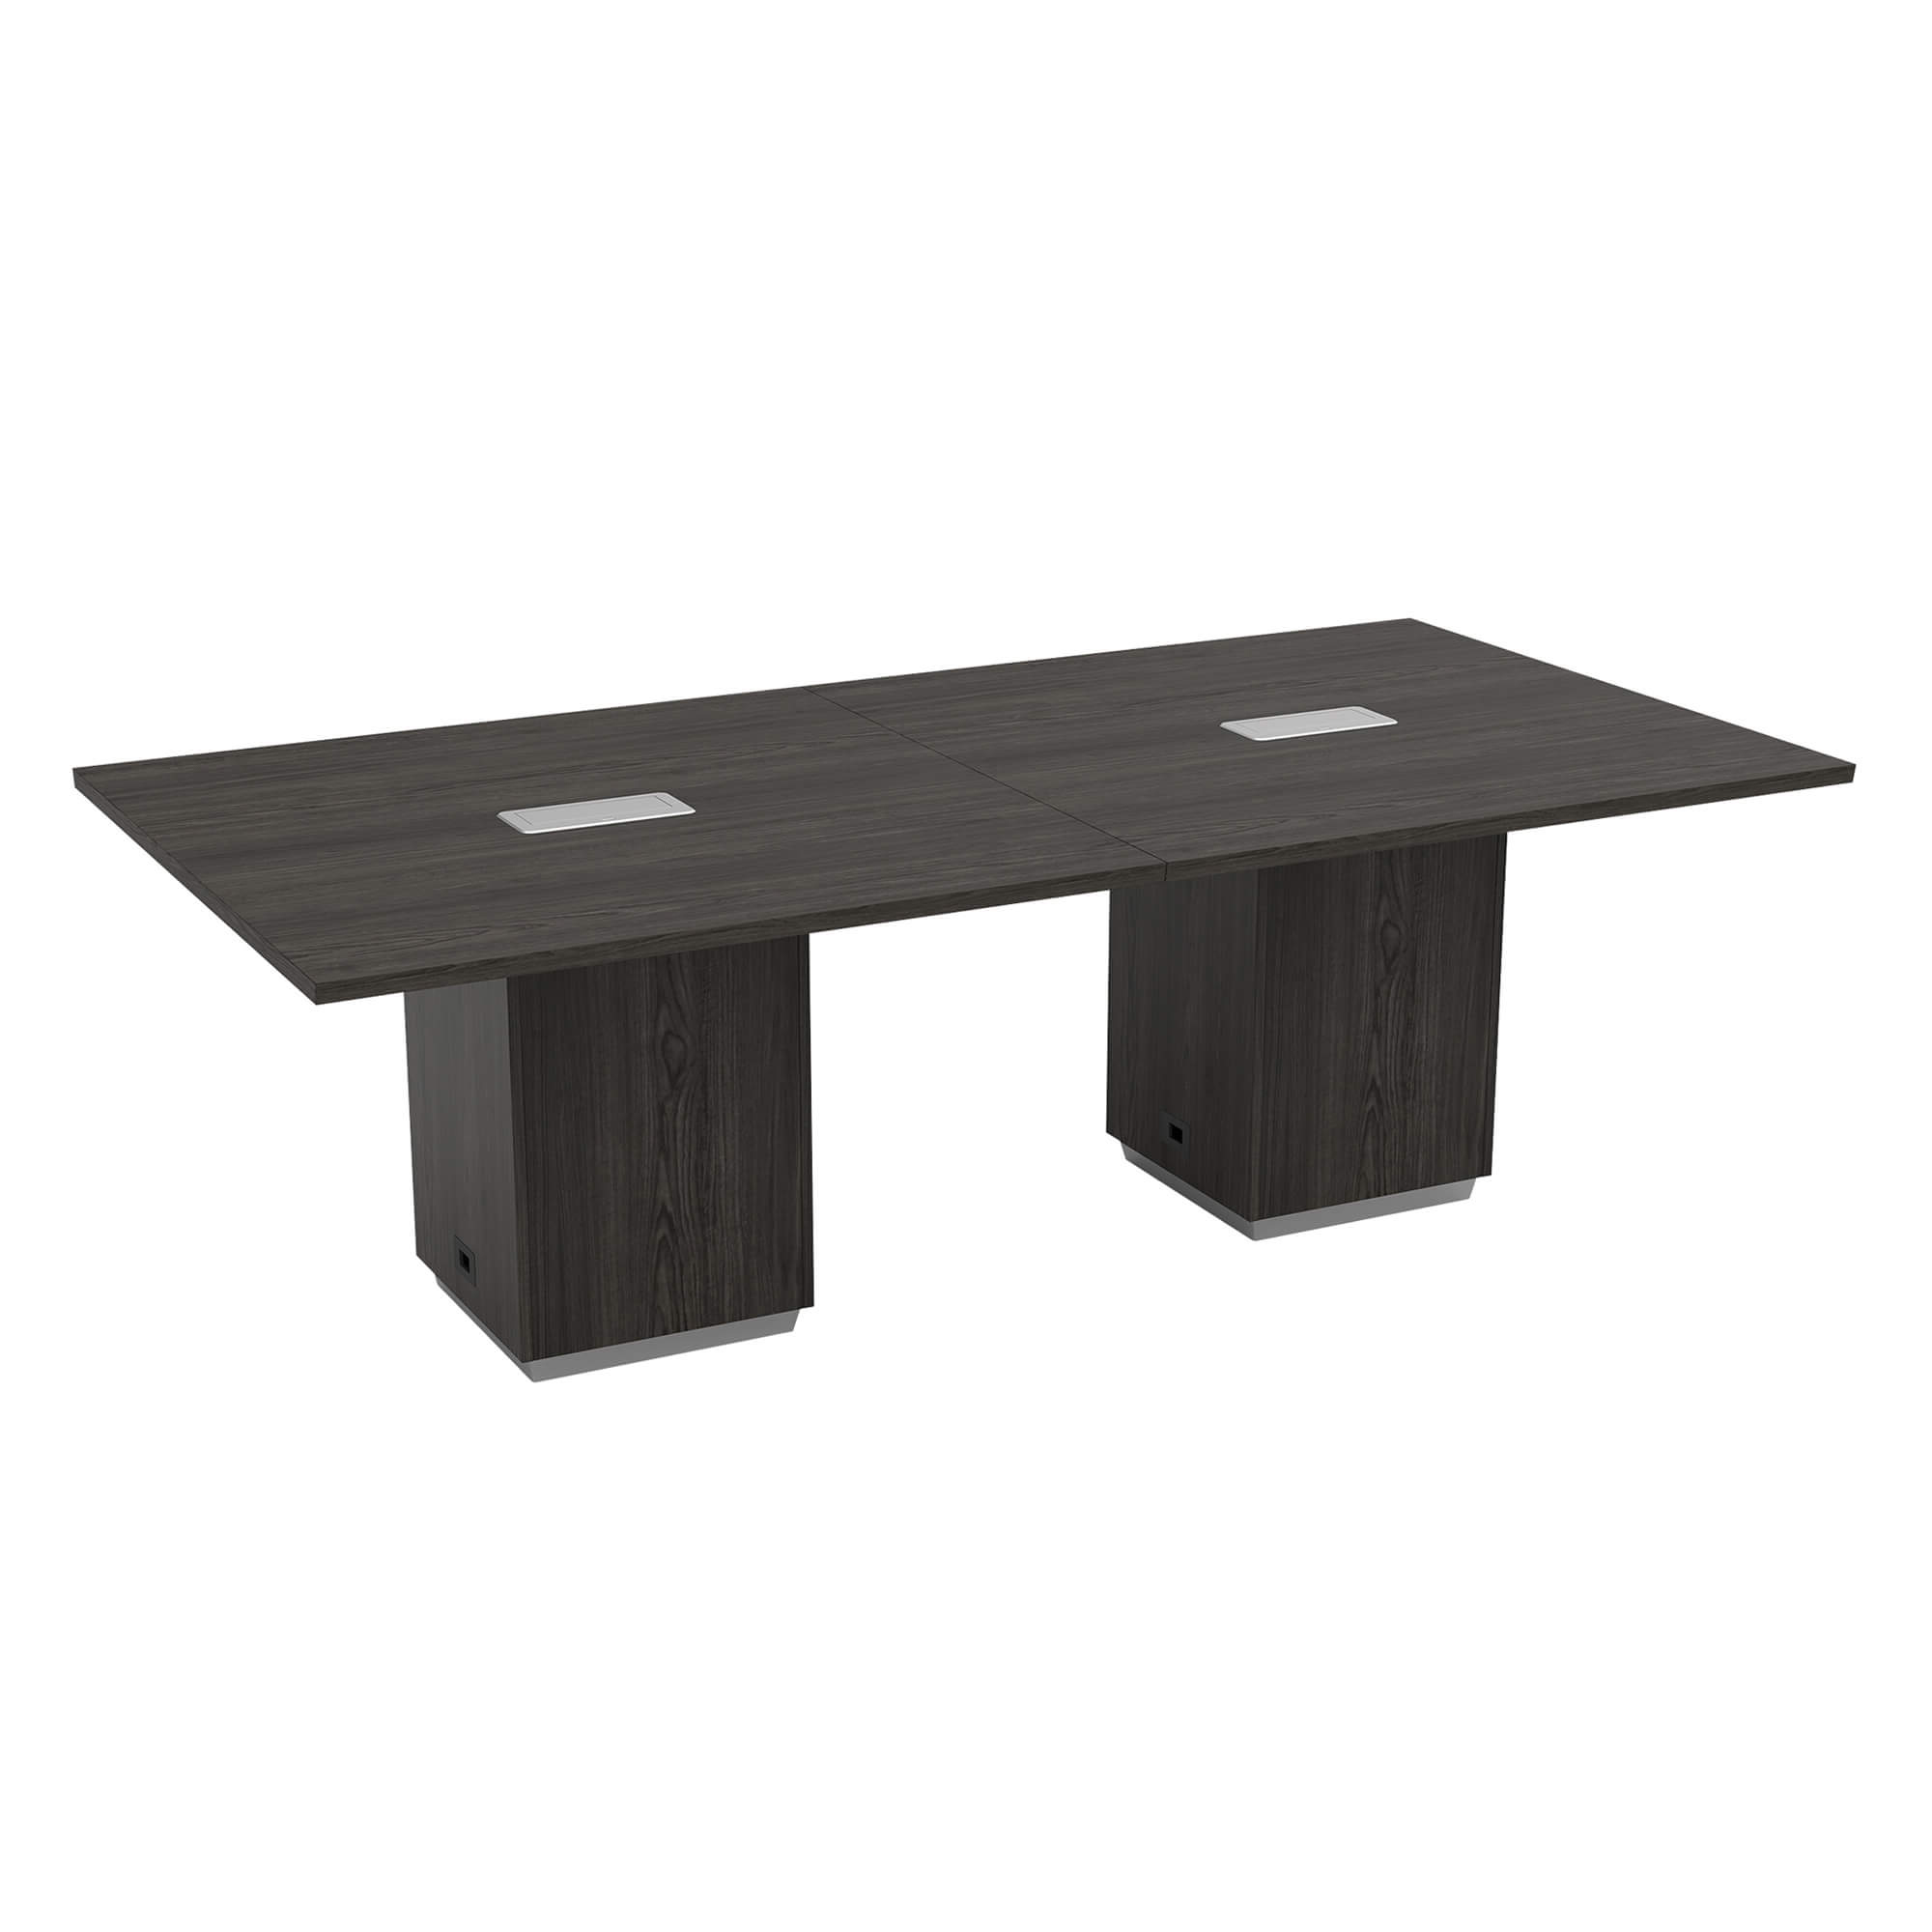 Conference tables CUB TUXSGW 60 PSO 1